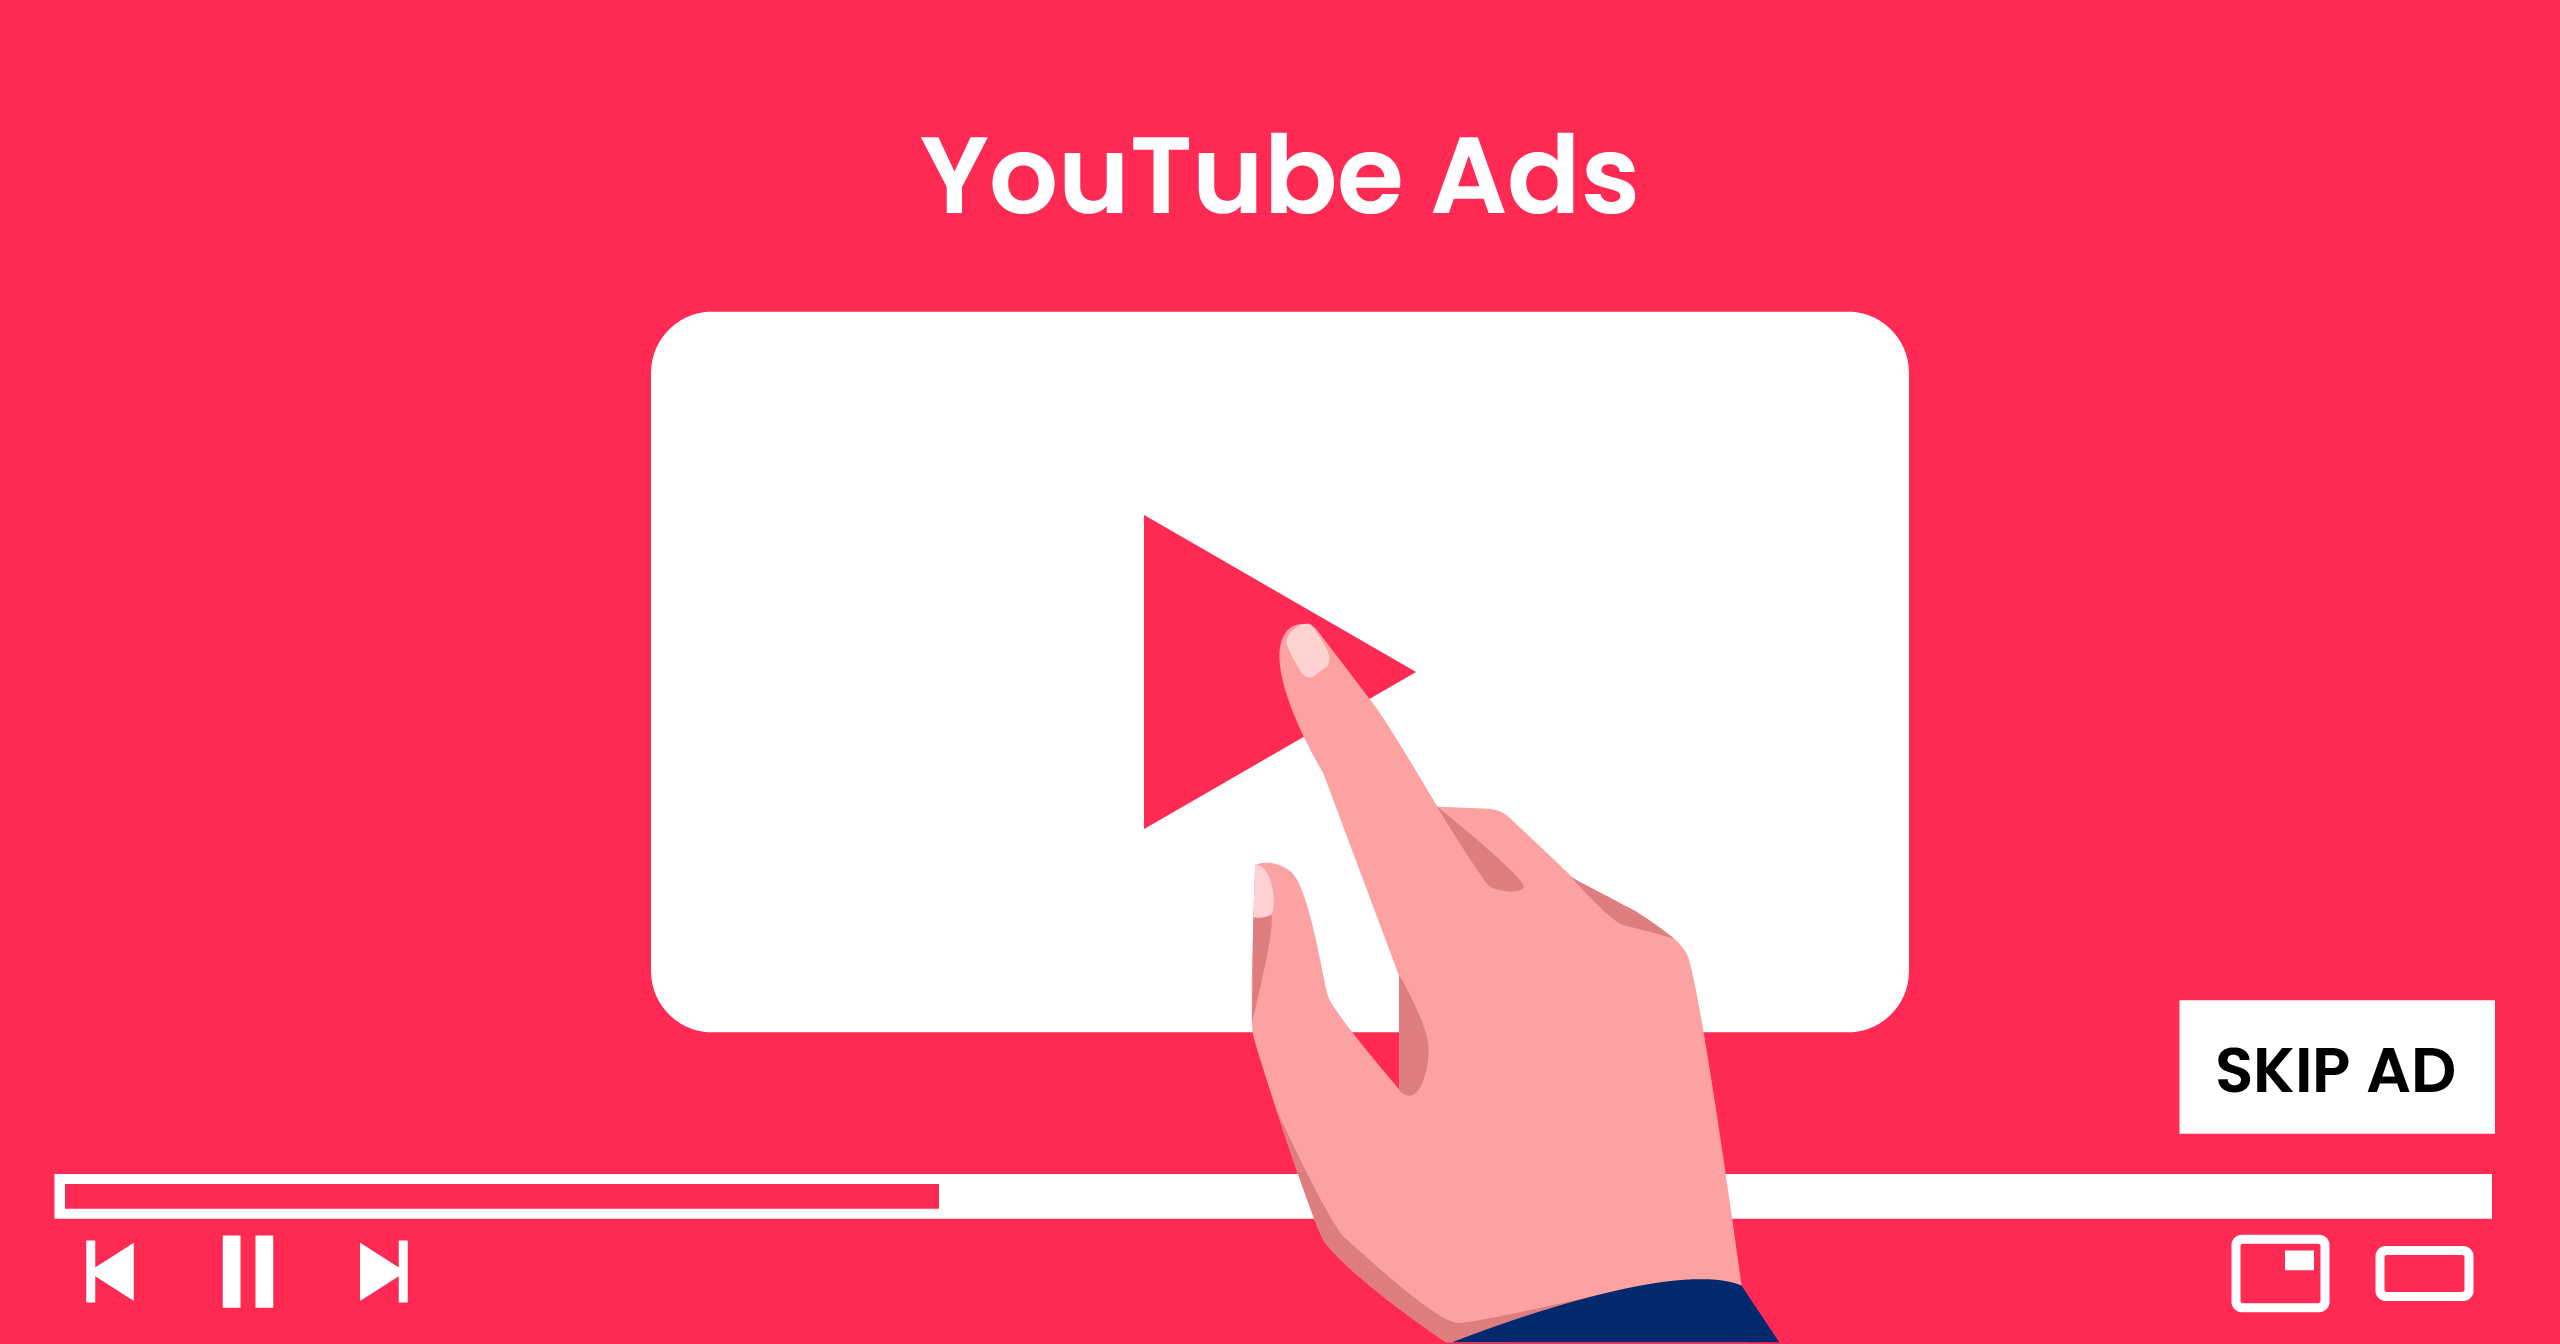 YouTube ads: how to launch a successful video campaign